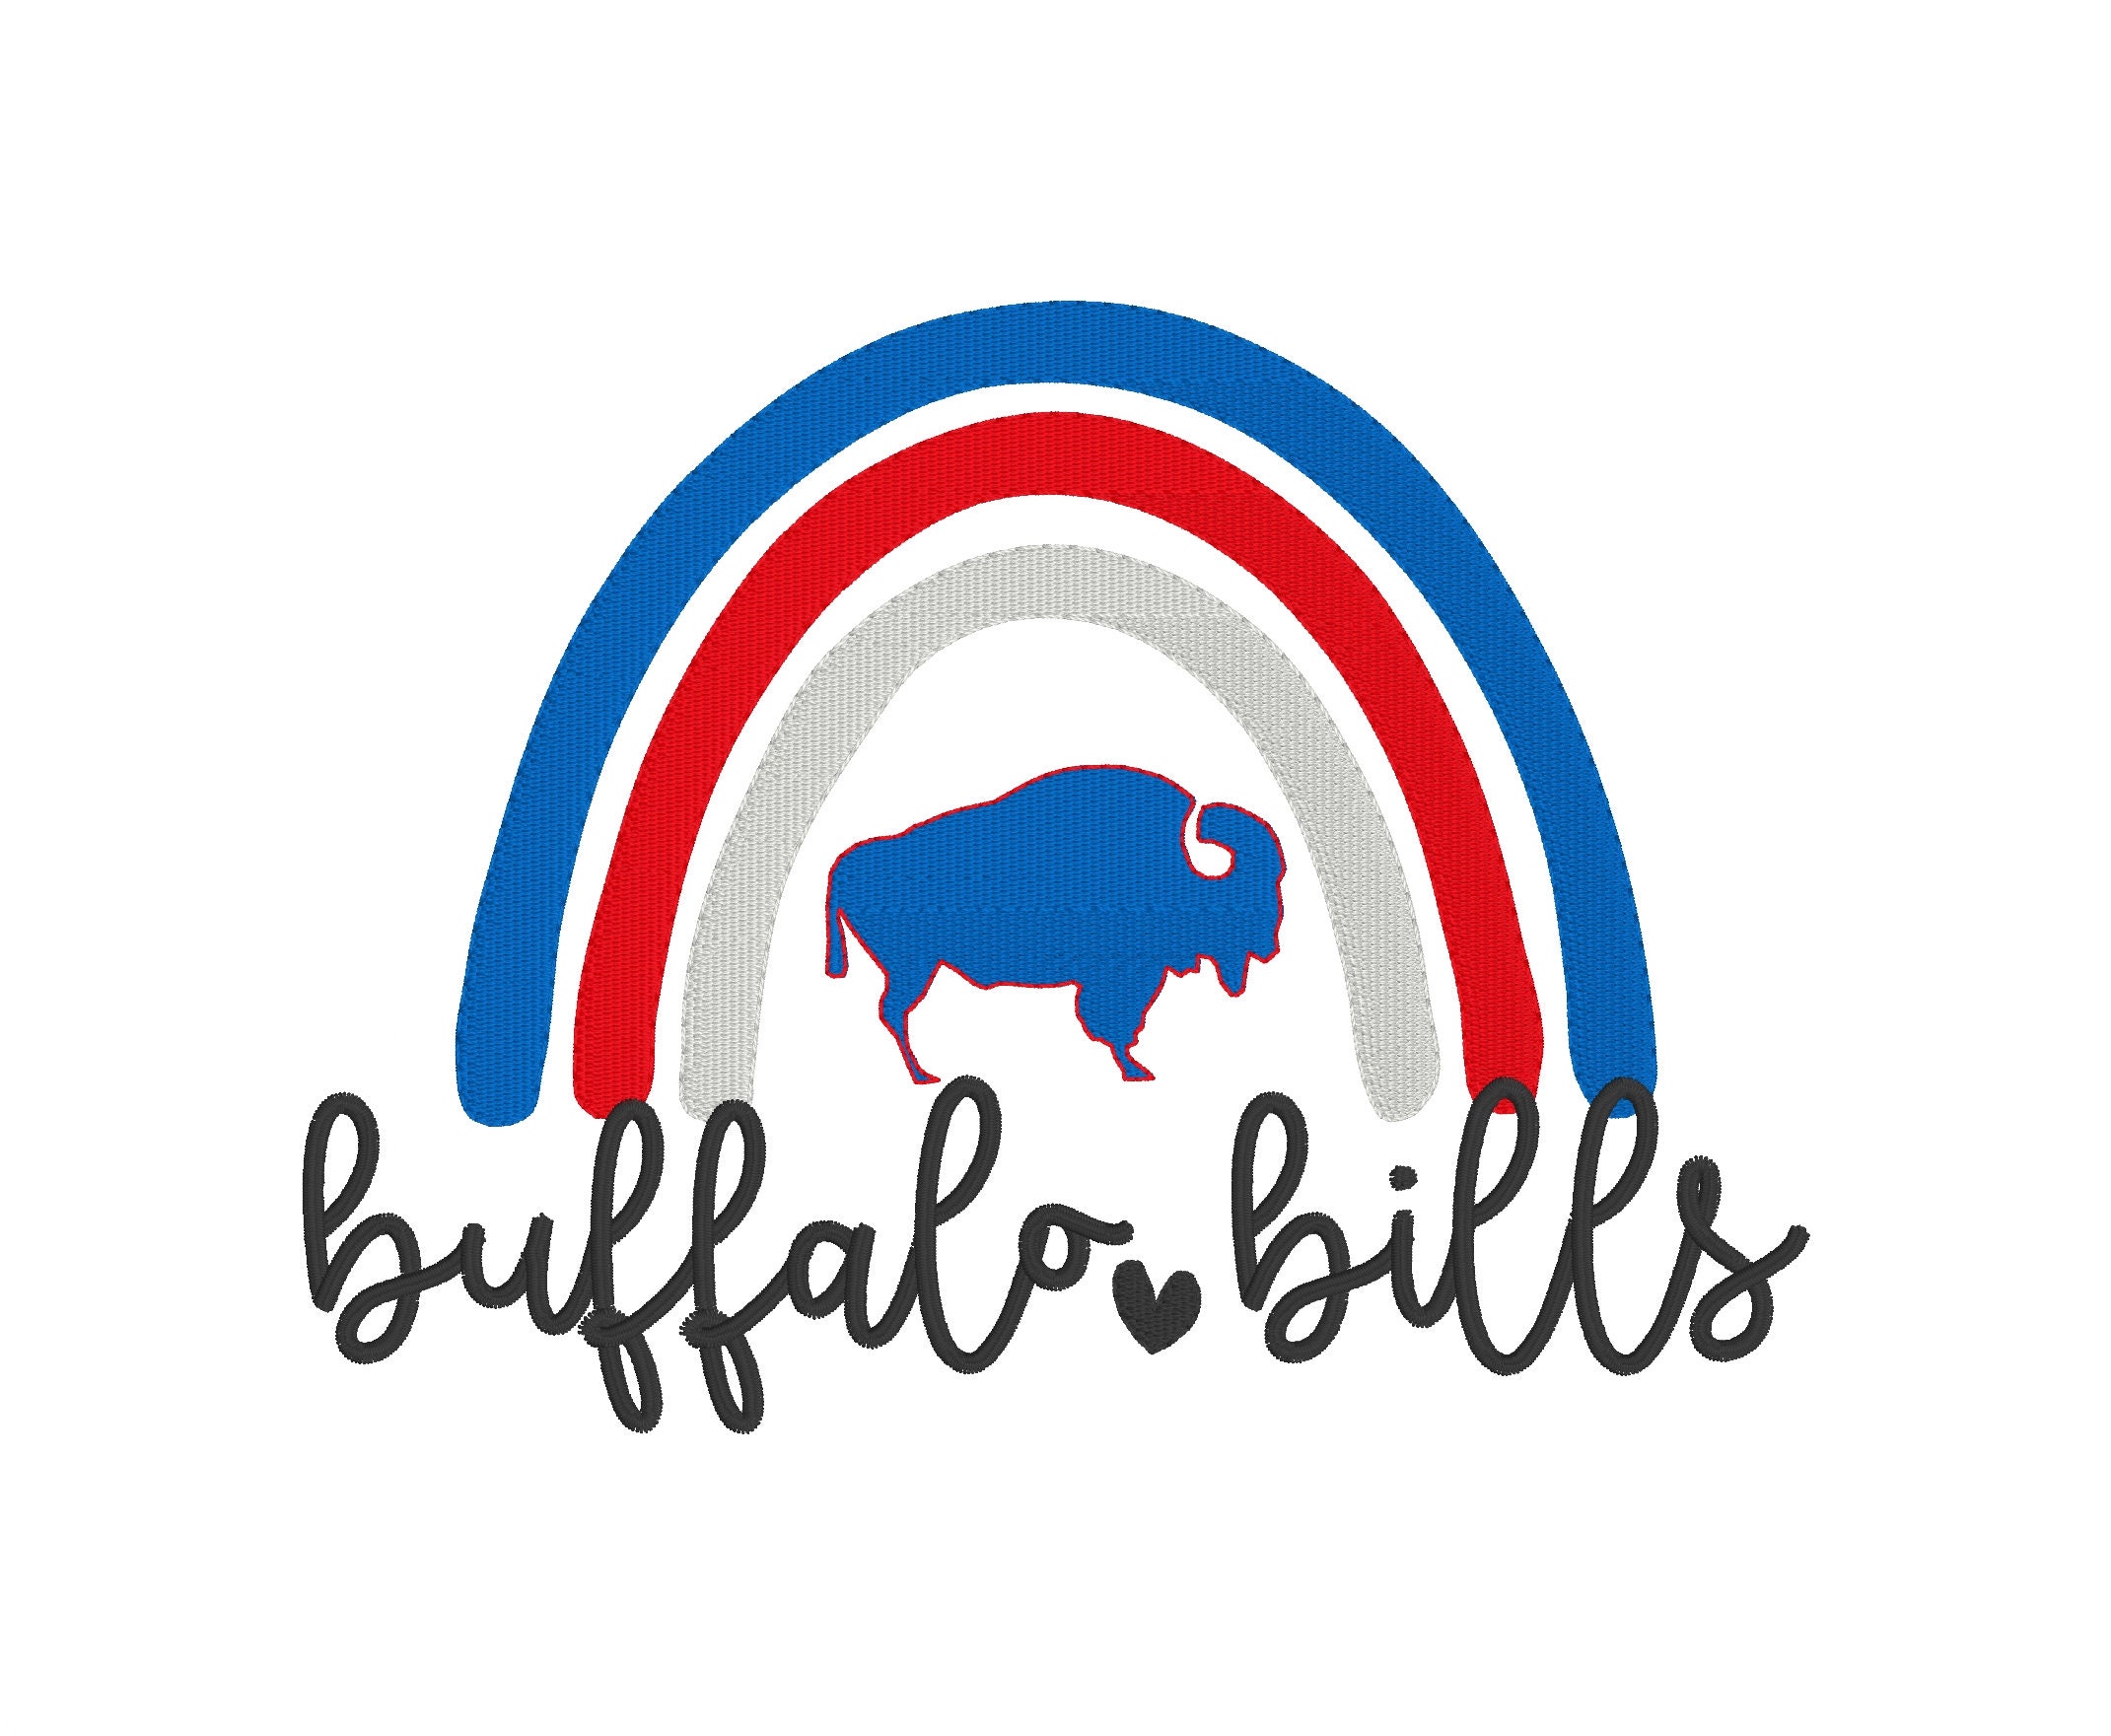 BILLS - New York State Police Buffalo Bills Support Patch – GHOST PATCH